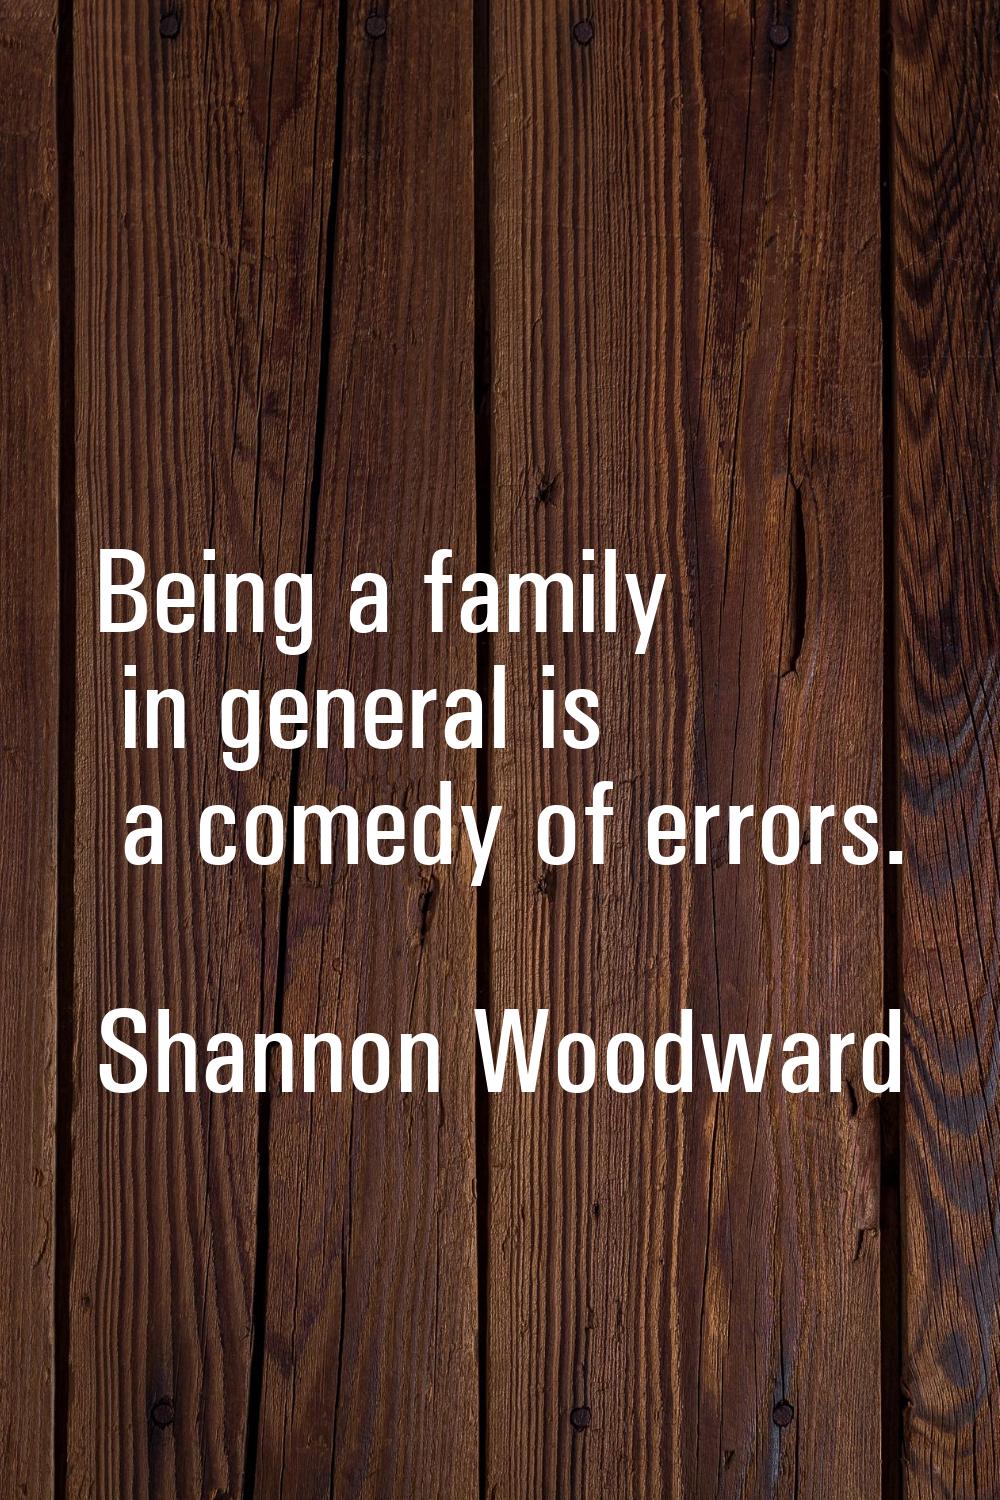 Being a family in general is a comedy of errors.